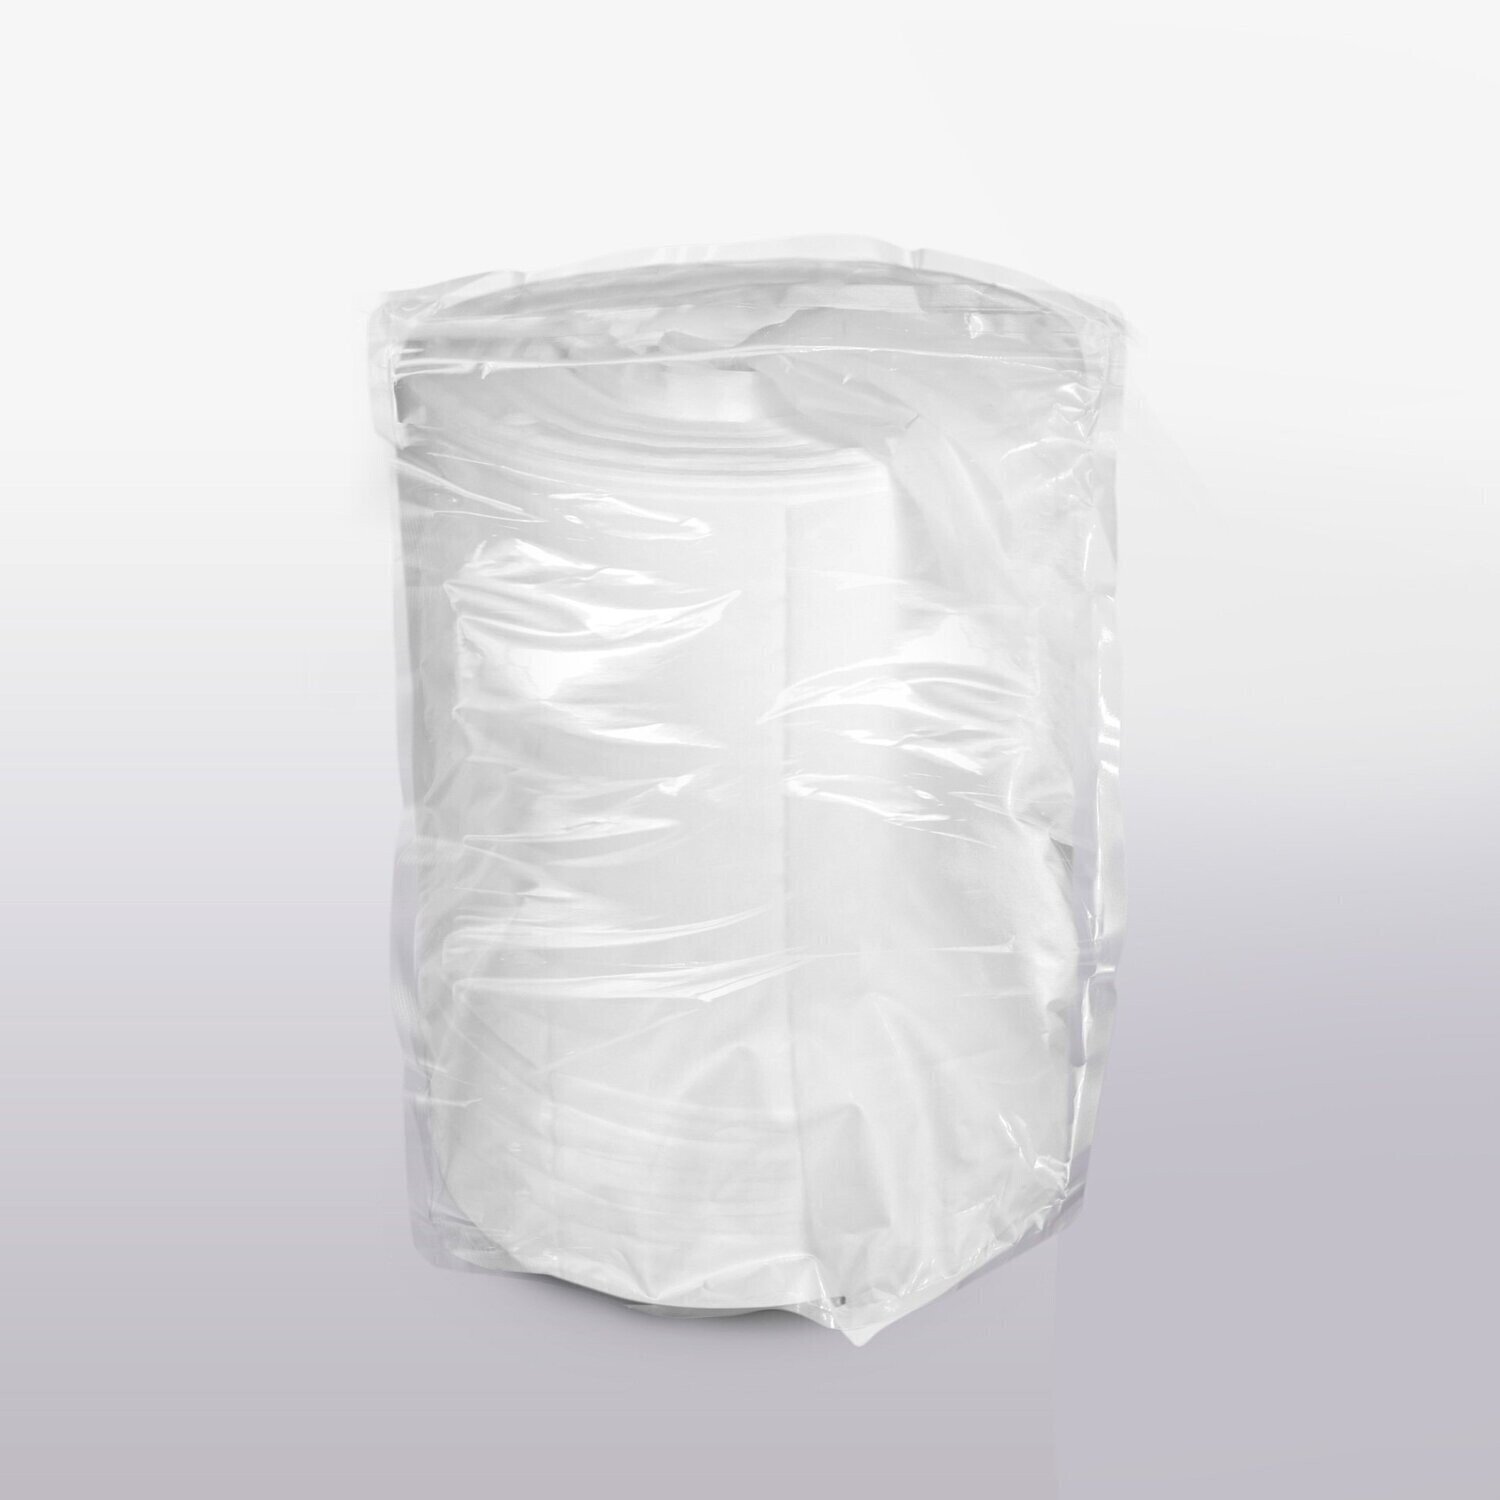 Iso Wipes Refills 75's, 24 pack carton